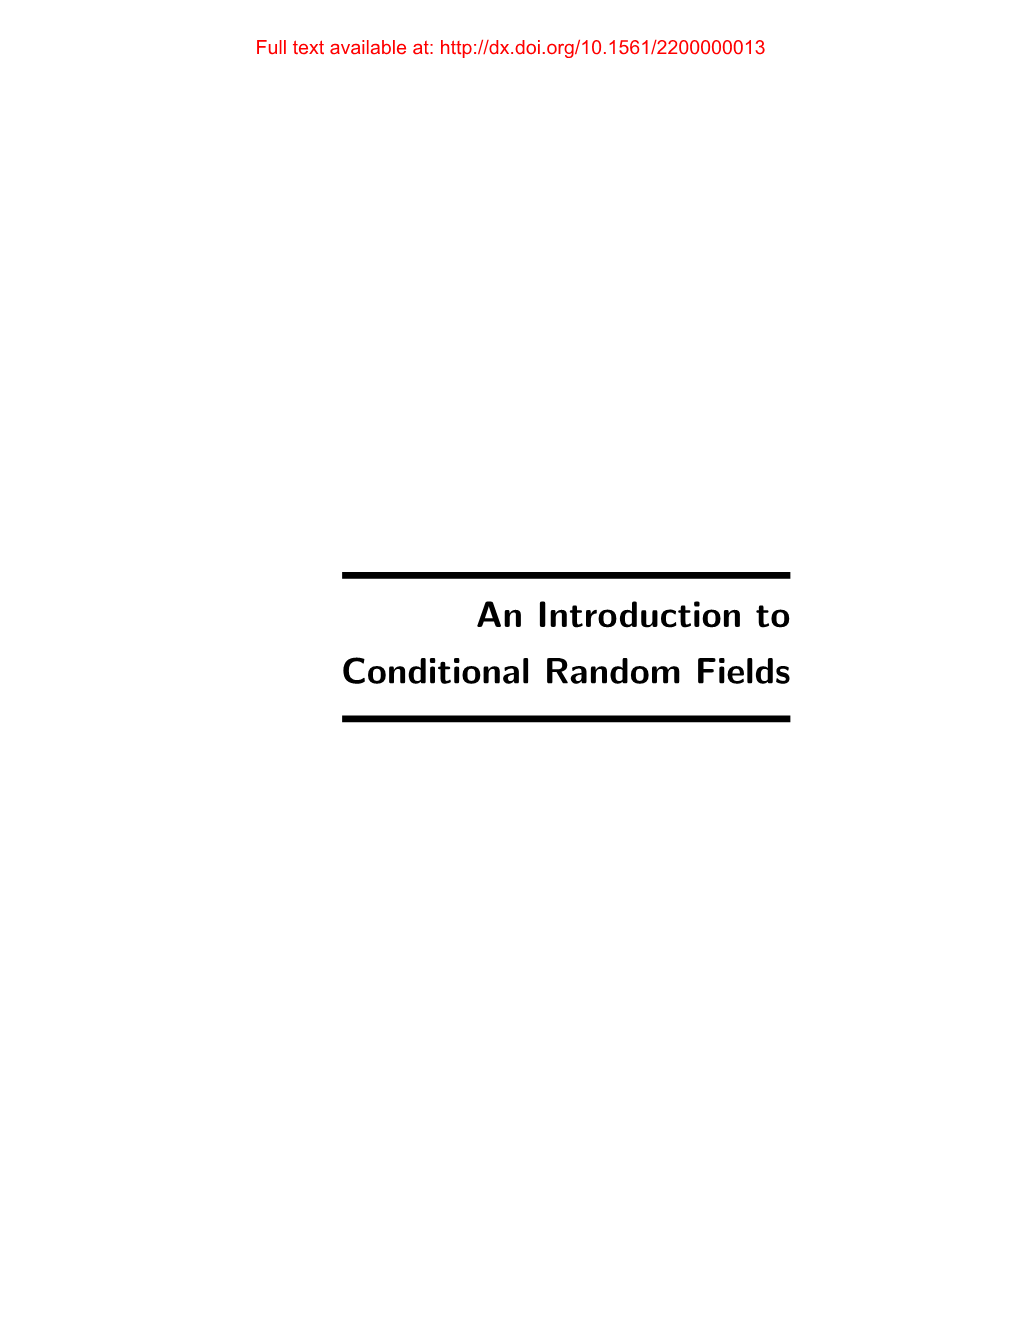 An Introduction to Conditional Random Fields Full Text Available At